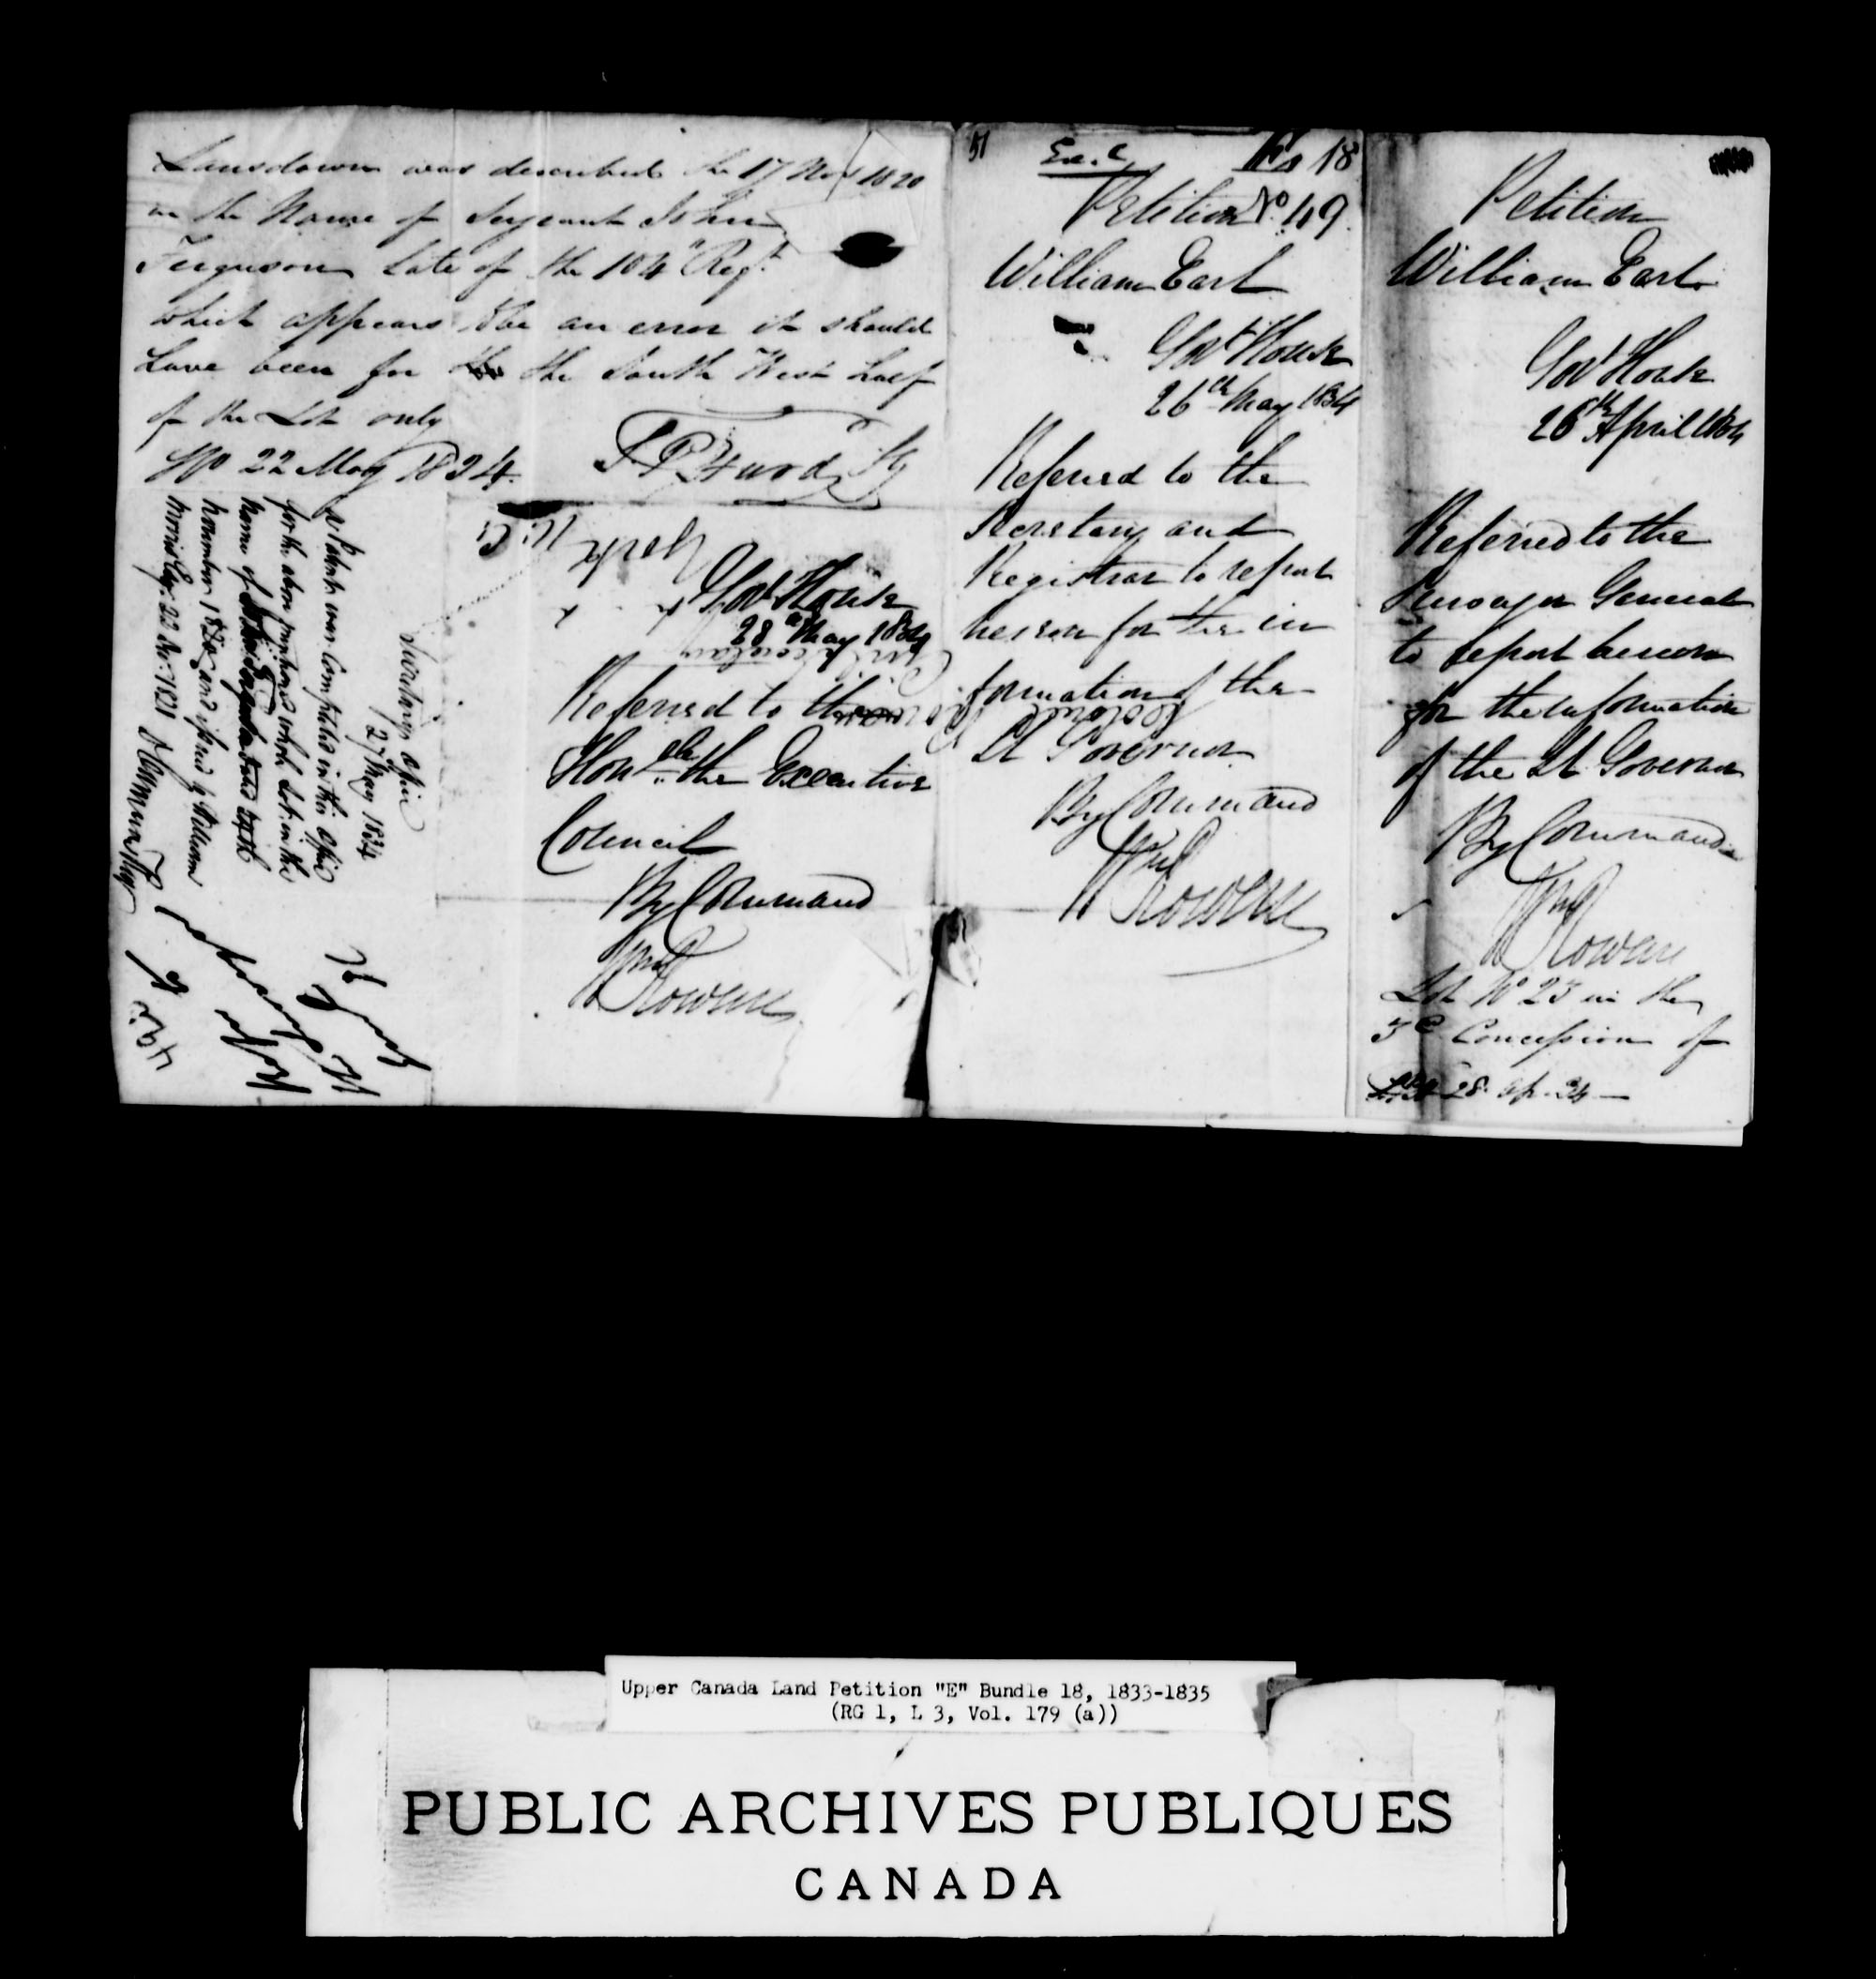 Title: Upper Canada Land Petitions (1763-1865) - Mikan Number: 205131 - Microform: c-1890